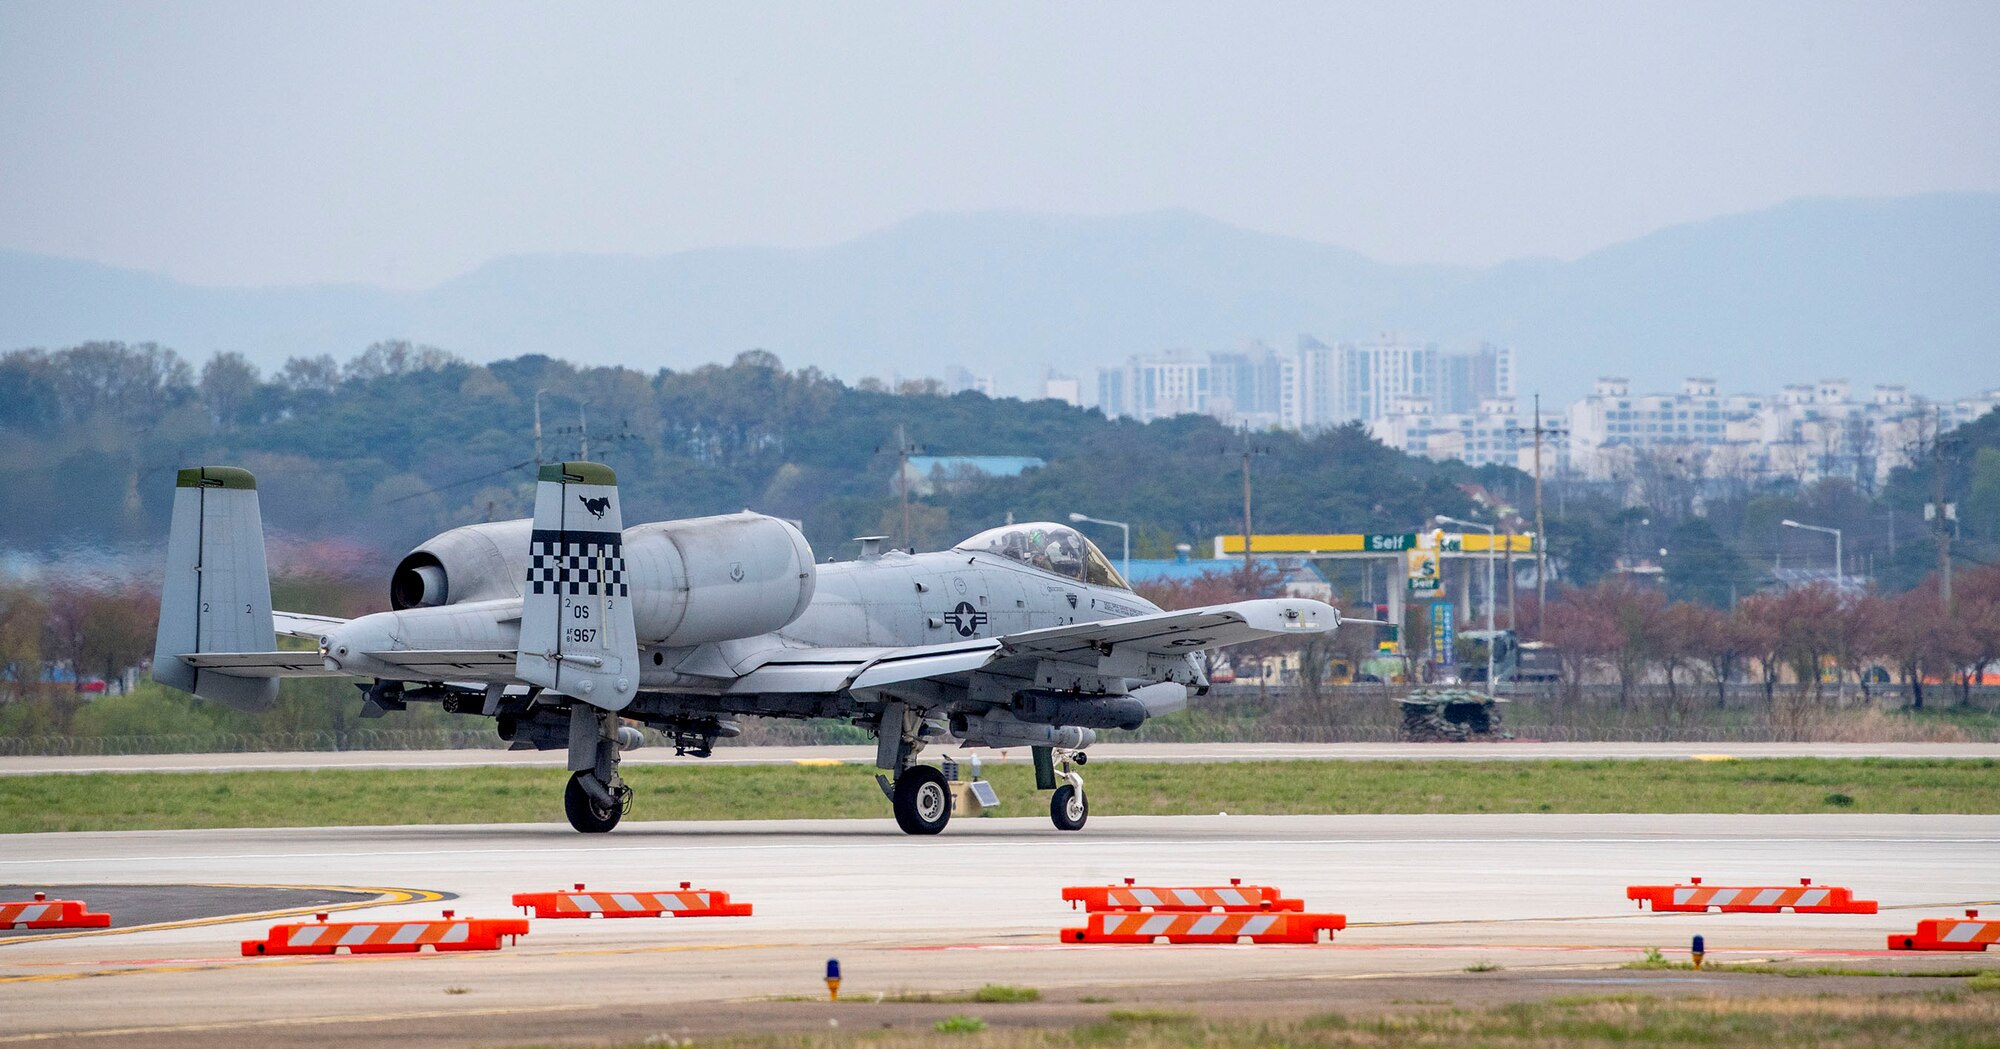 A 25th Fighter Squadron A-10C Thunderbolt II pilot taxis the runway prior to takeoff April 20, 2020, at Osan Air Base, Republic of Korea. Amid the COVID-19 global pandemic, the 25th FS follows the United States Forces-Korea’s health protection control measures to preserve their mission capabilities while maintaining a high state of readiness to protect the ROK. (U.S. Air Force photo by Senior Airman Darien Perez)